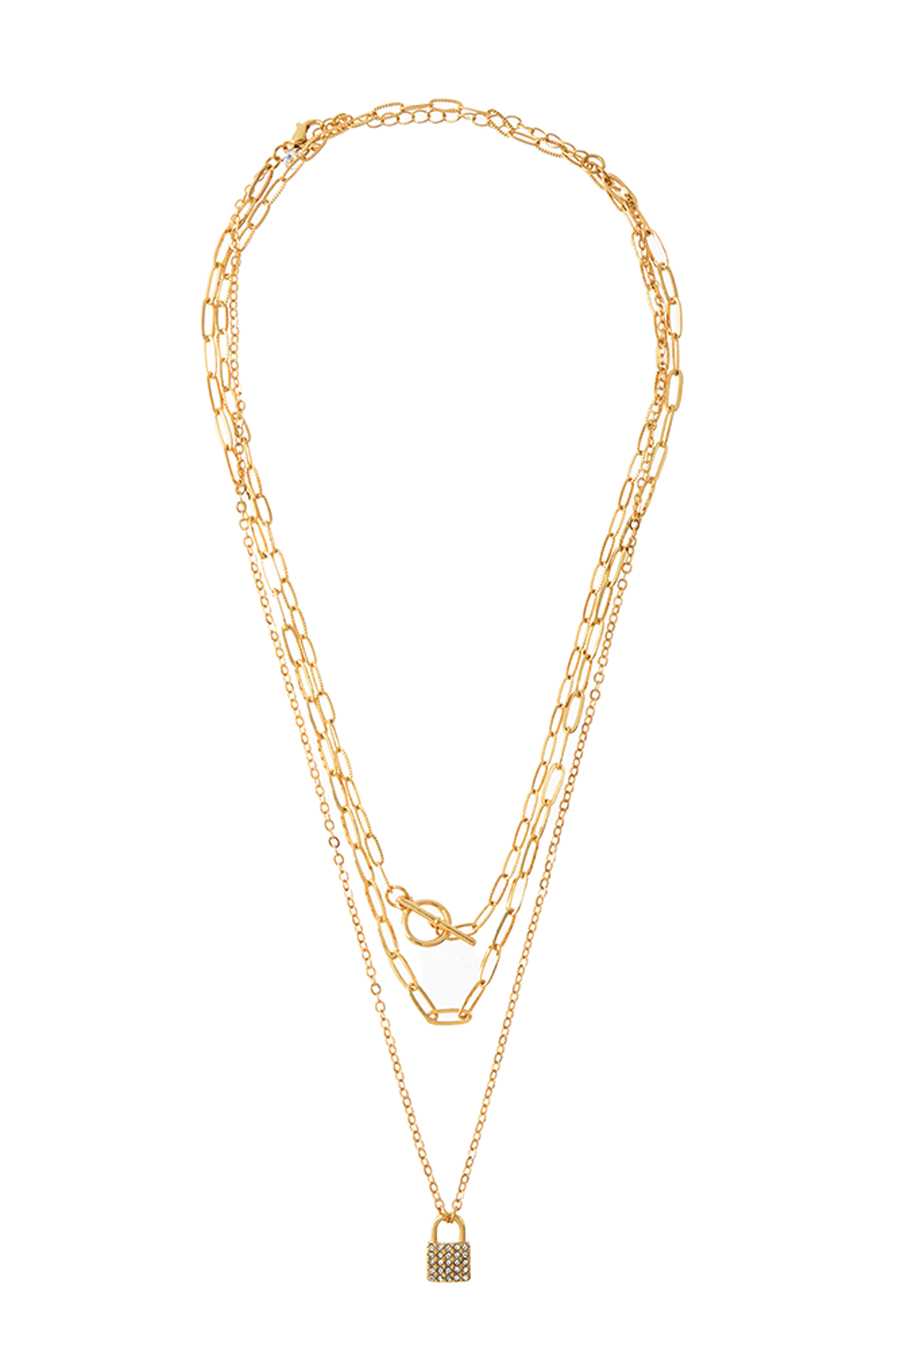 LAYERED THIN CHAIN NECKLACE WITH PADLOCK PENDANT